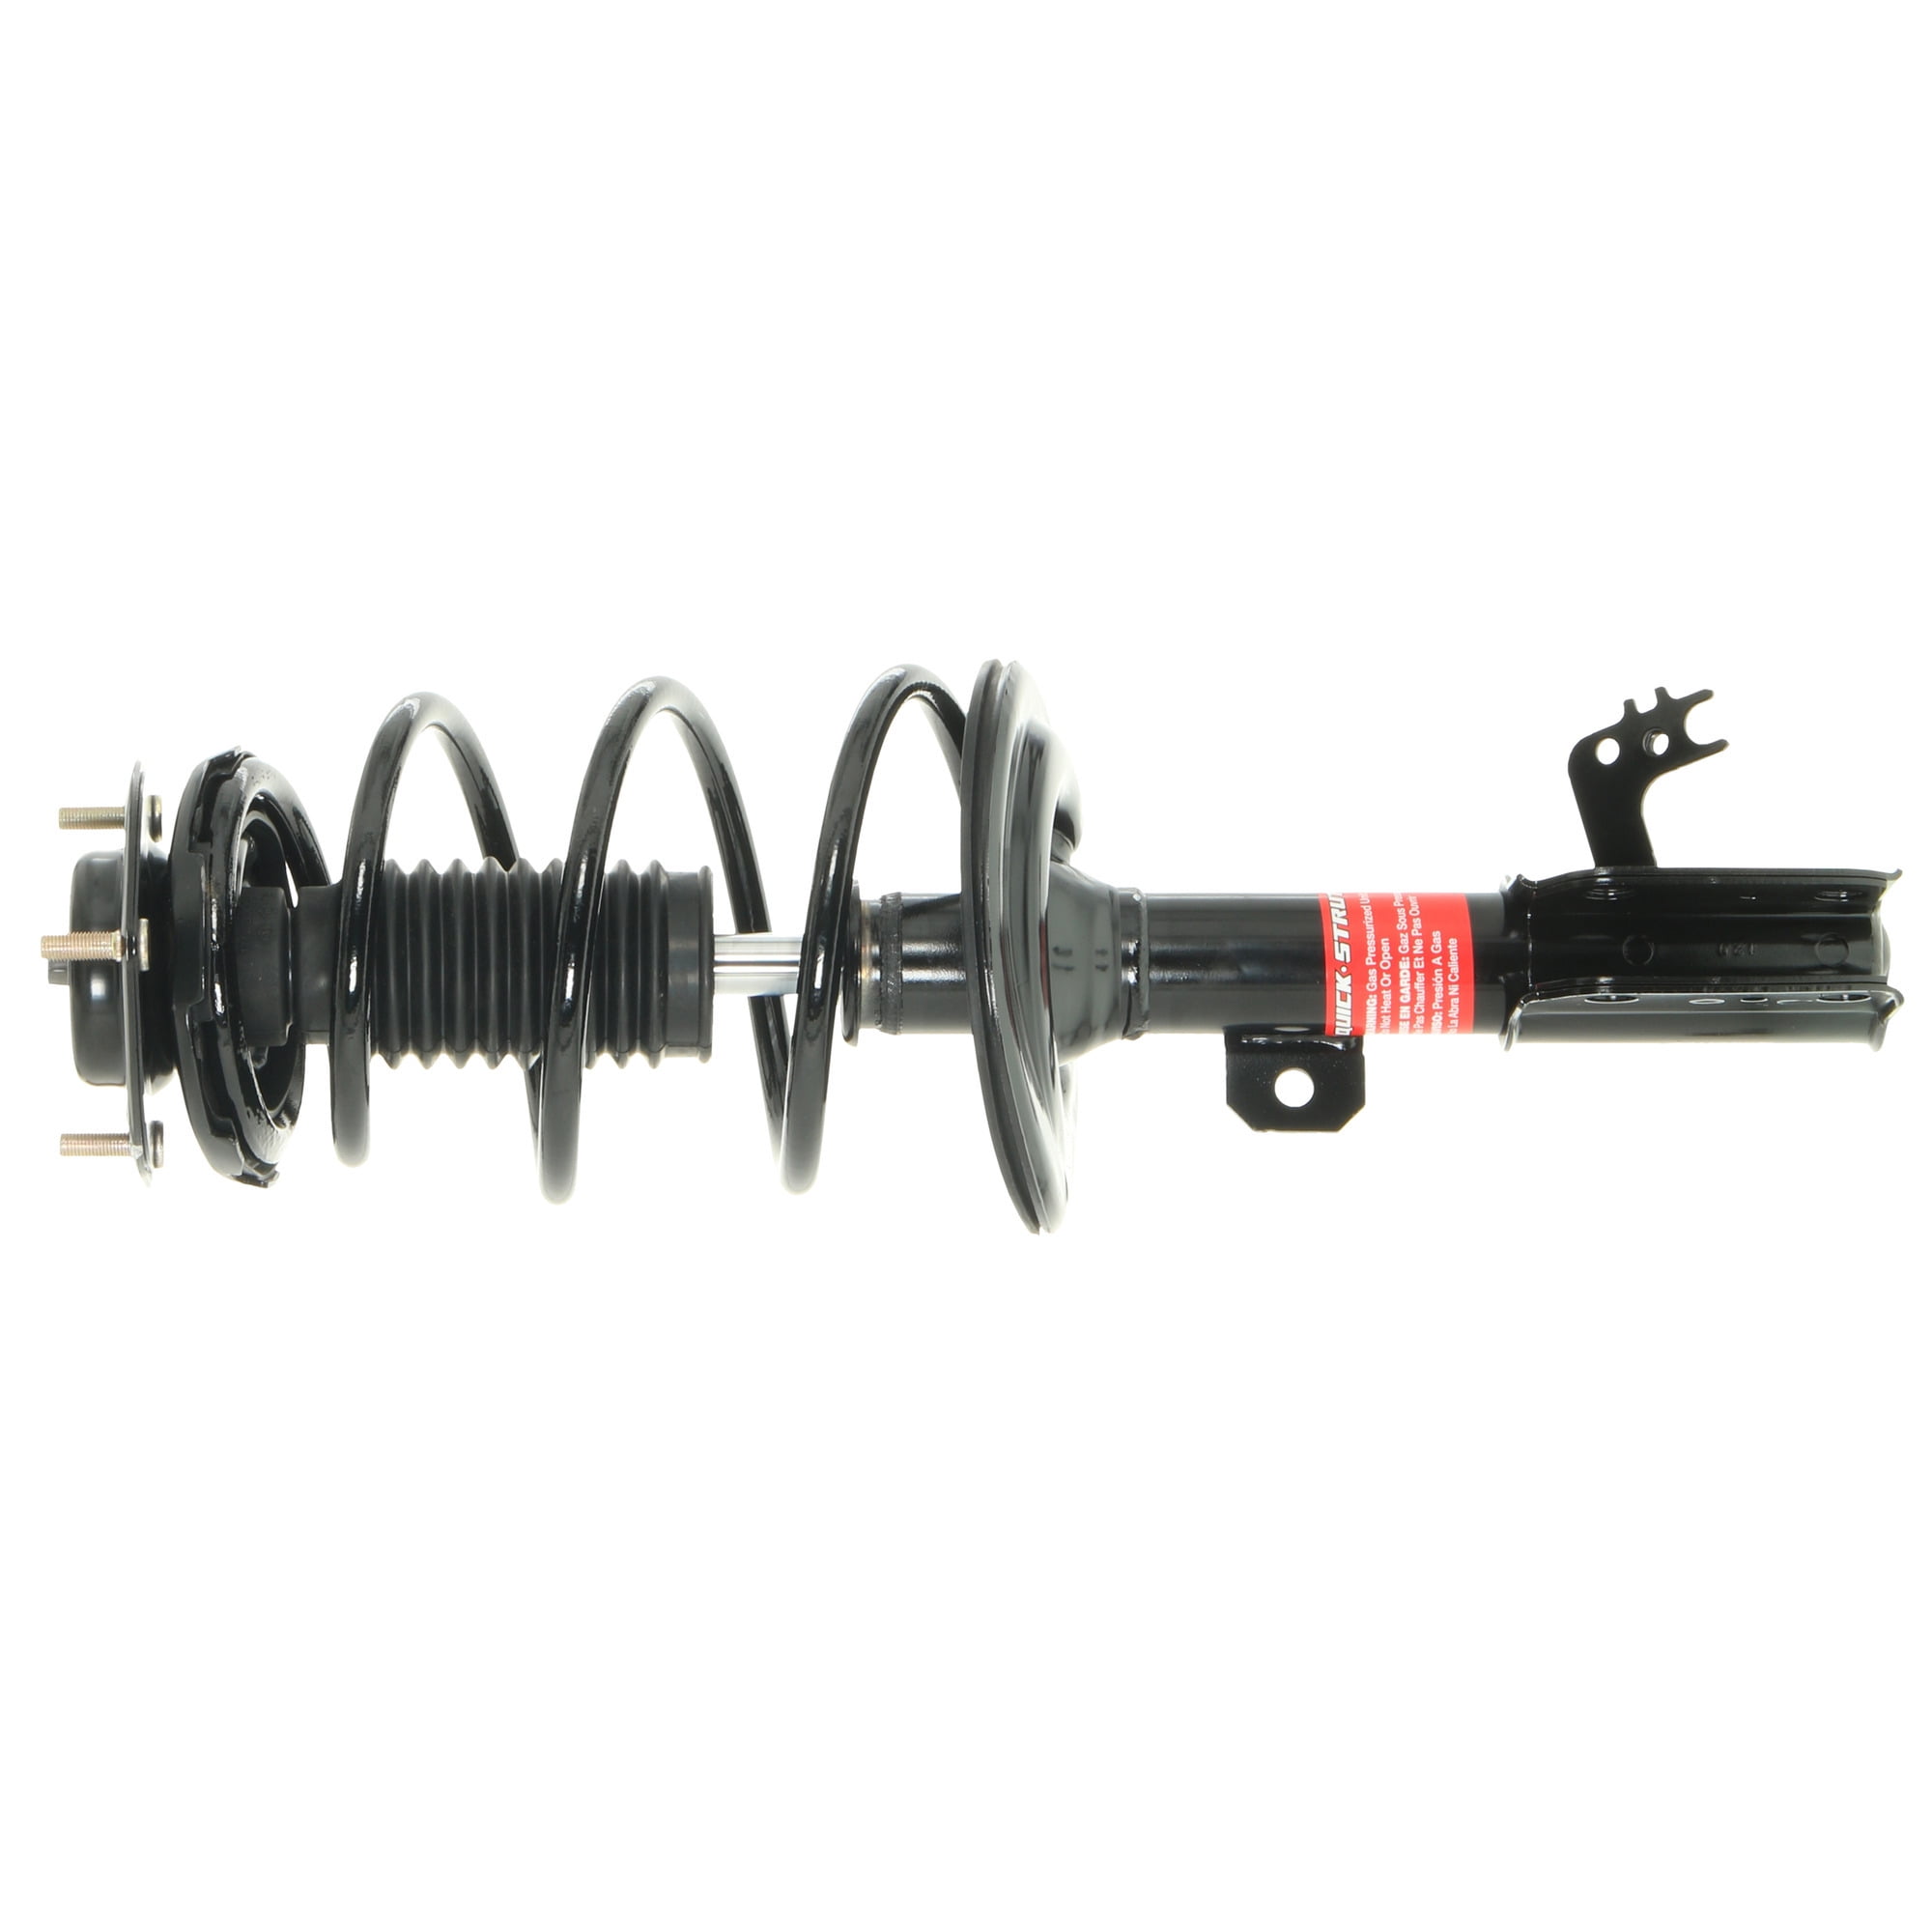 Difference Between Shocks & Struts